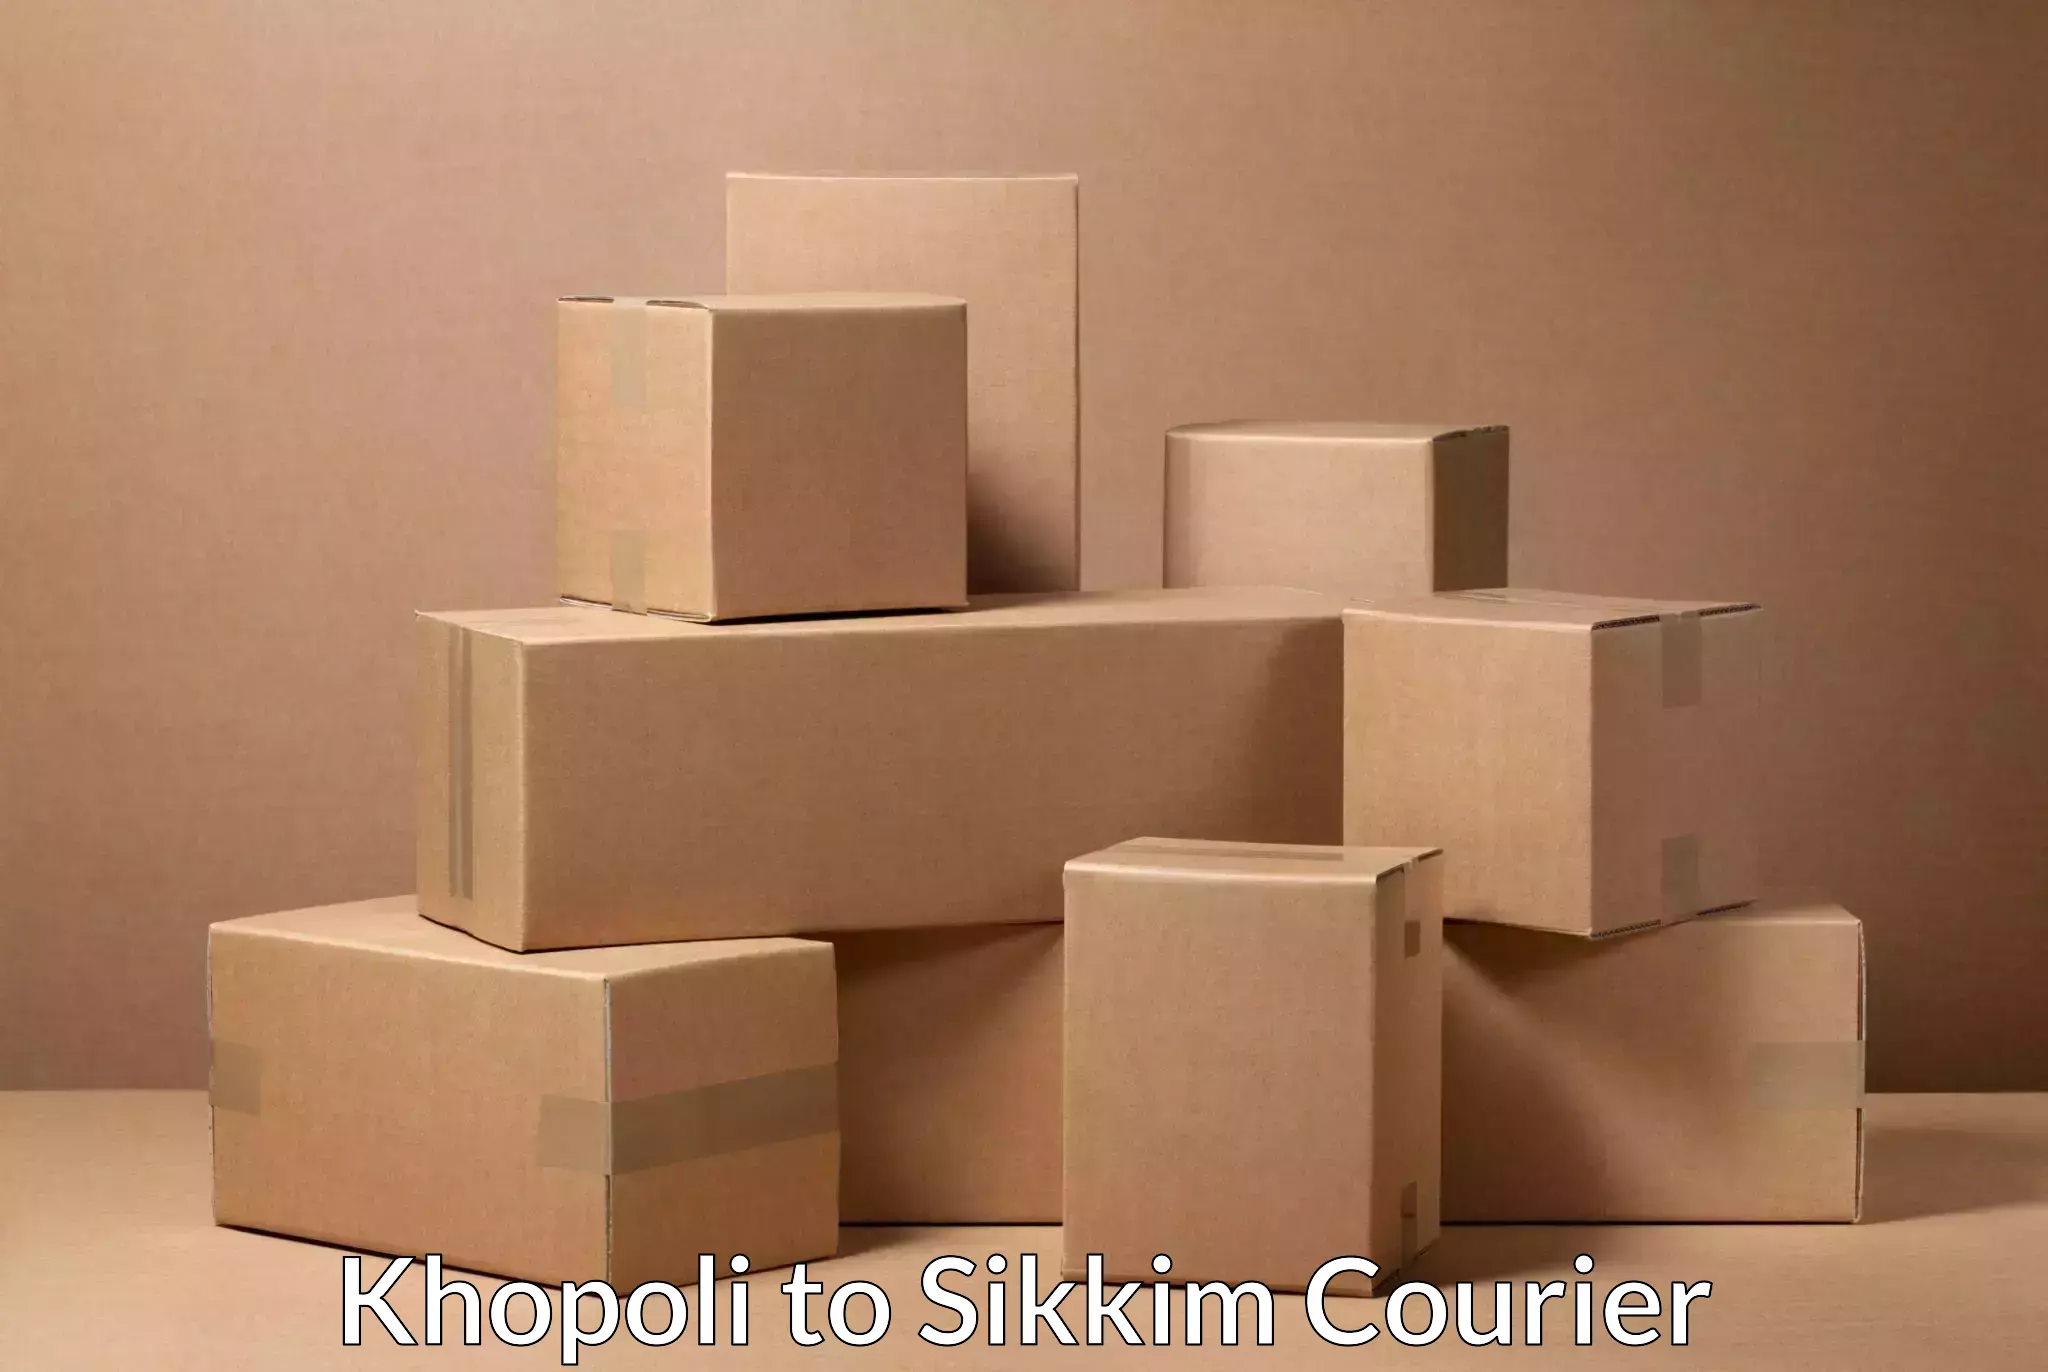 Scalable shipping solutions Khopoli to Pelling